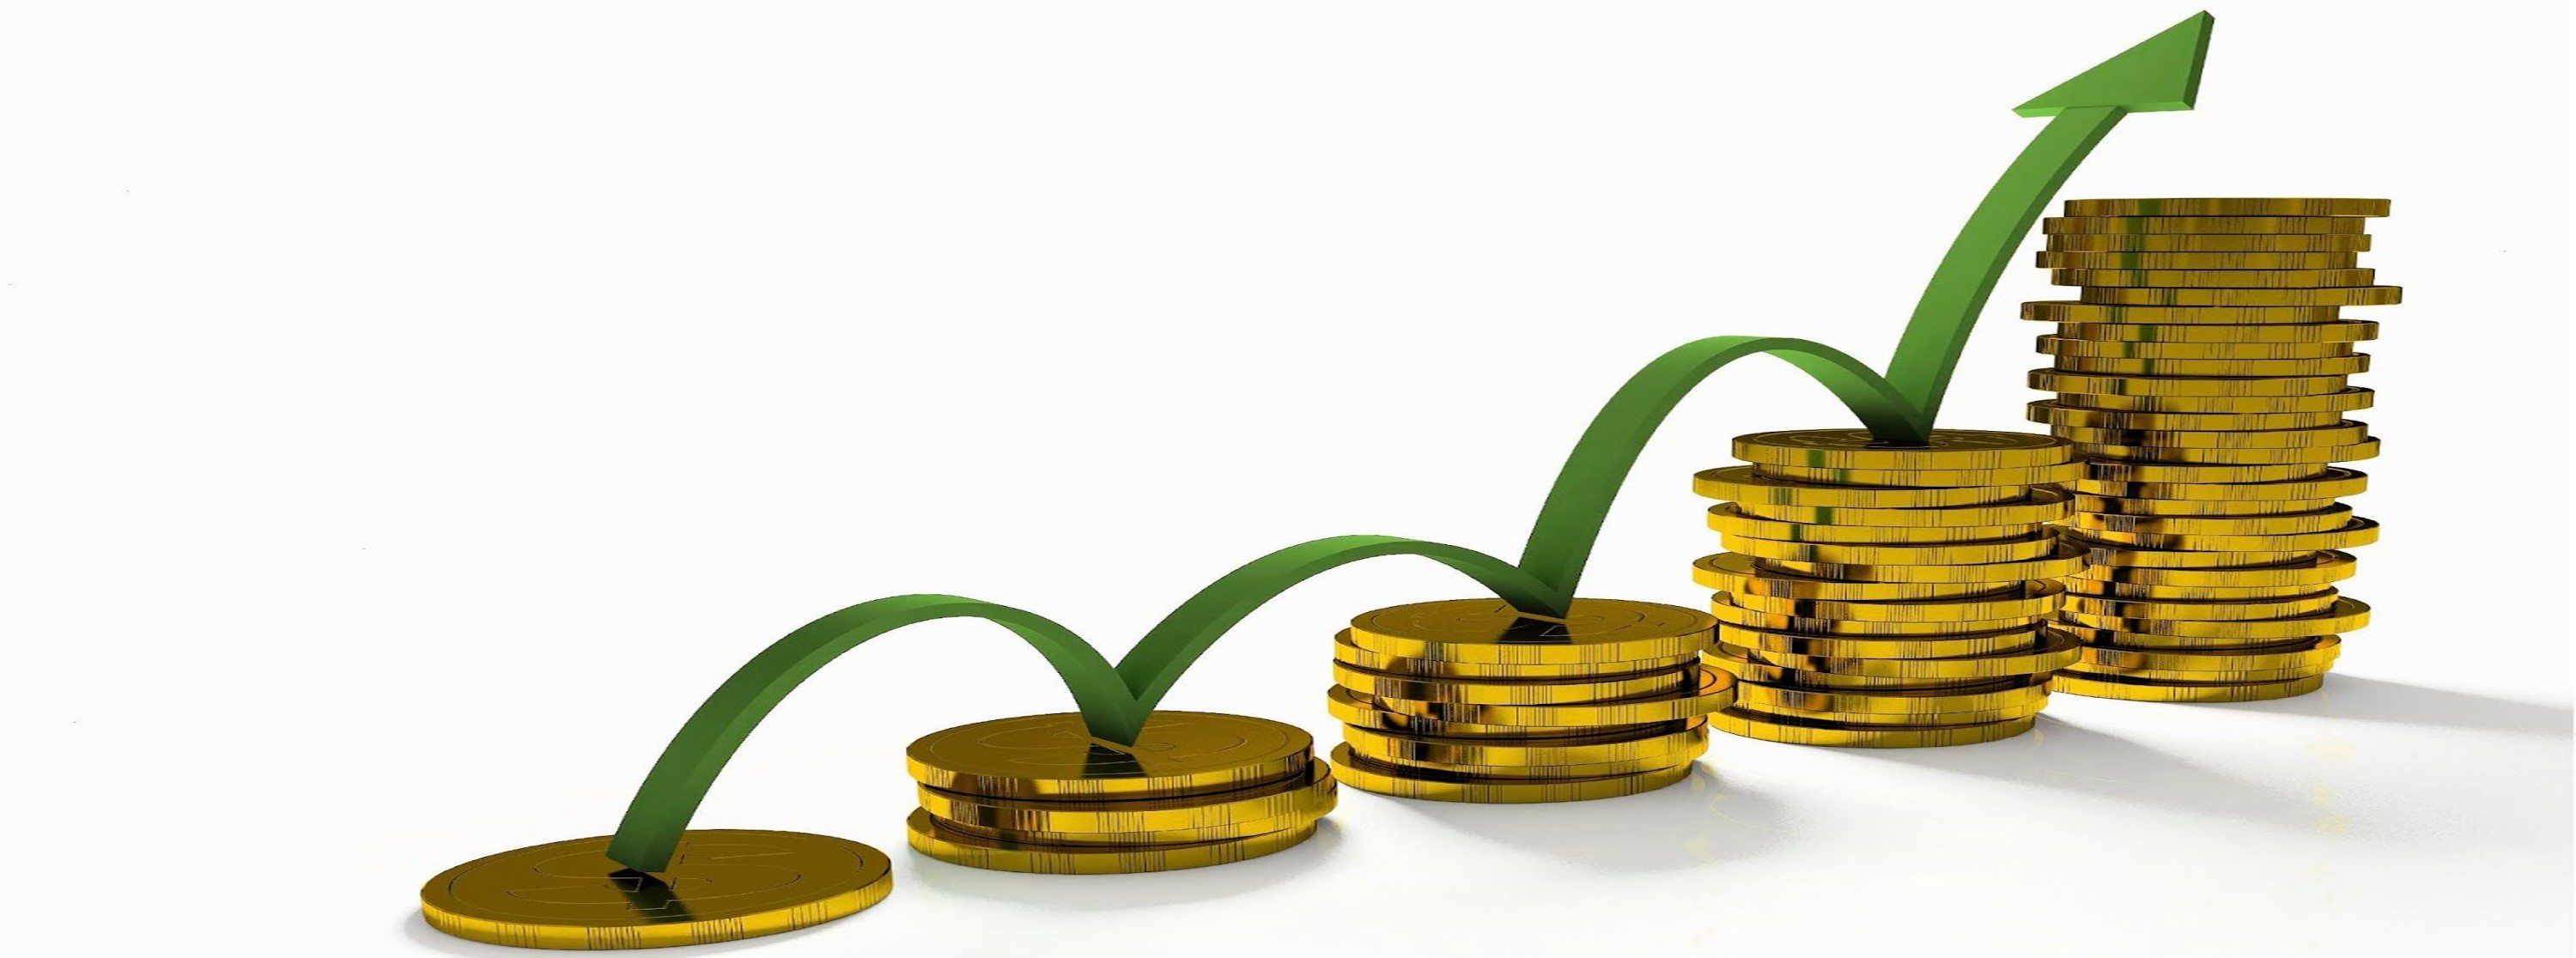 How to Invest in Kenyan Stocks, Bonds and Mutual Funds